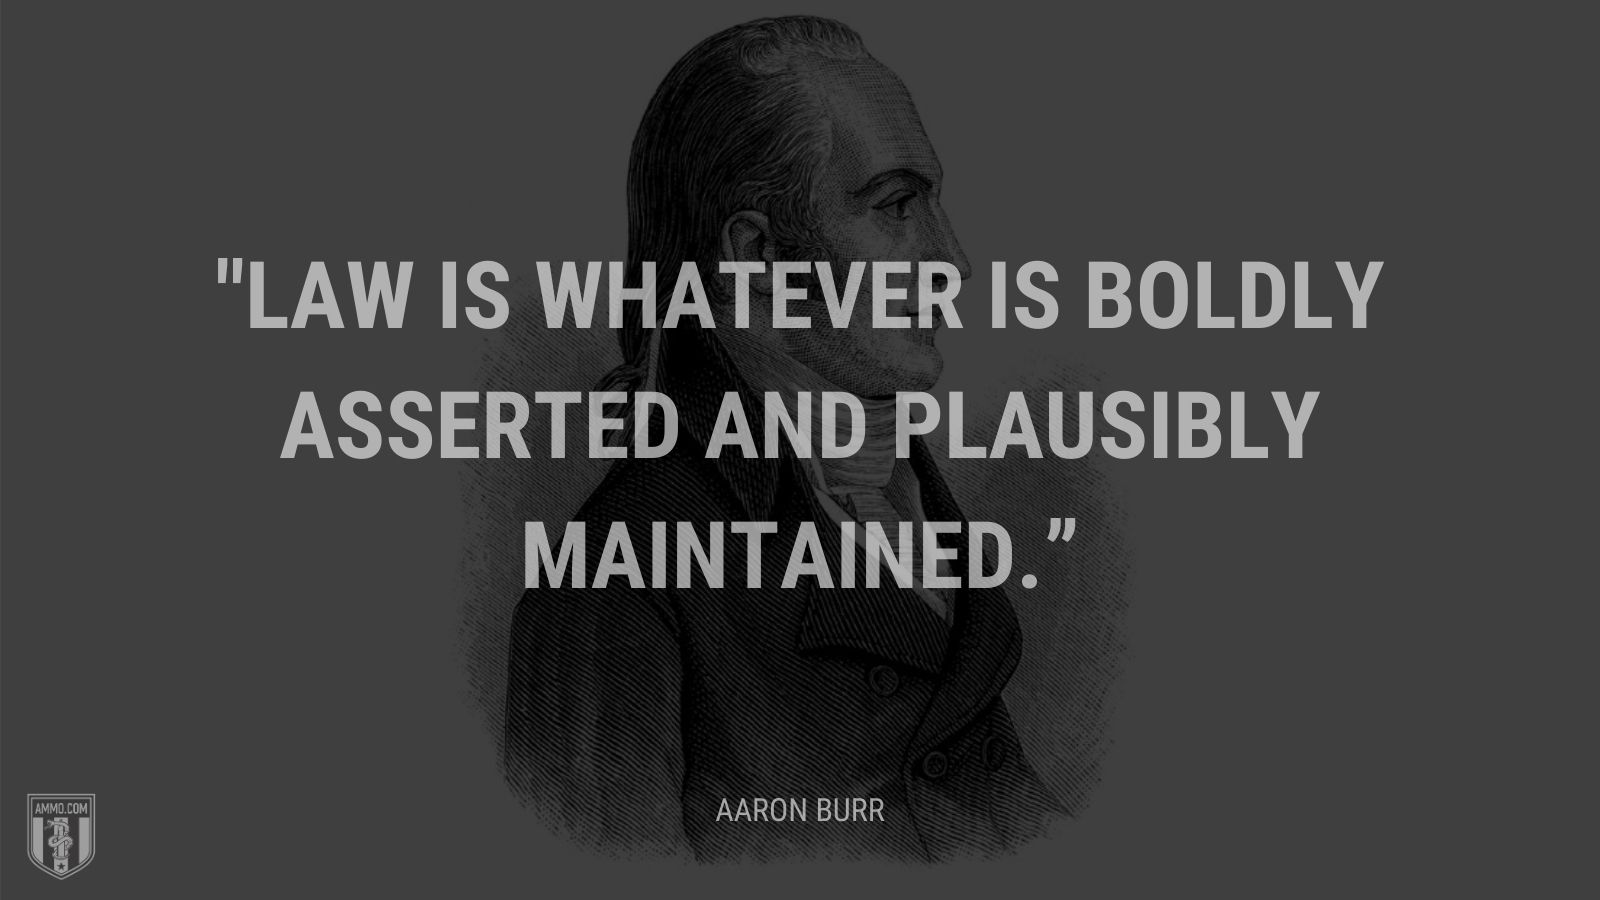 “Law is whatever is boldly asserted and plausibly maintained.” - Aaron Burr